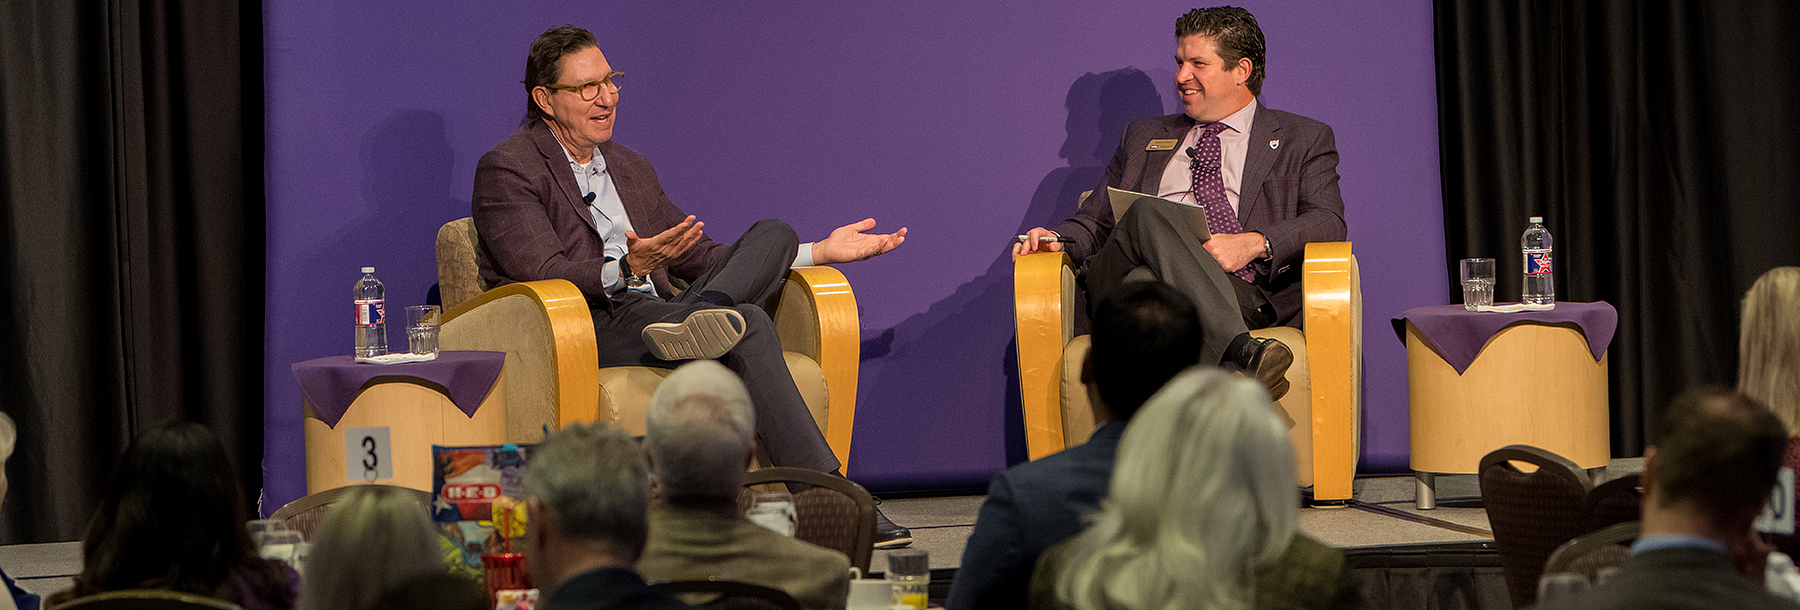 Section Image: Scott McClelland and Dean Daniel Pullin at Tandy Executive Speaker Series 